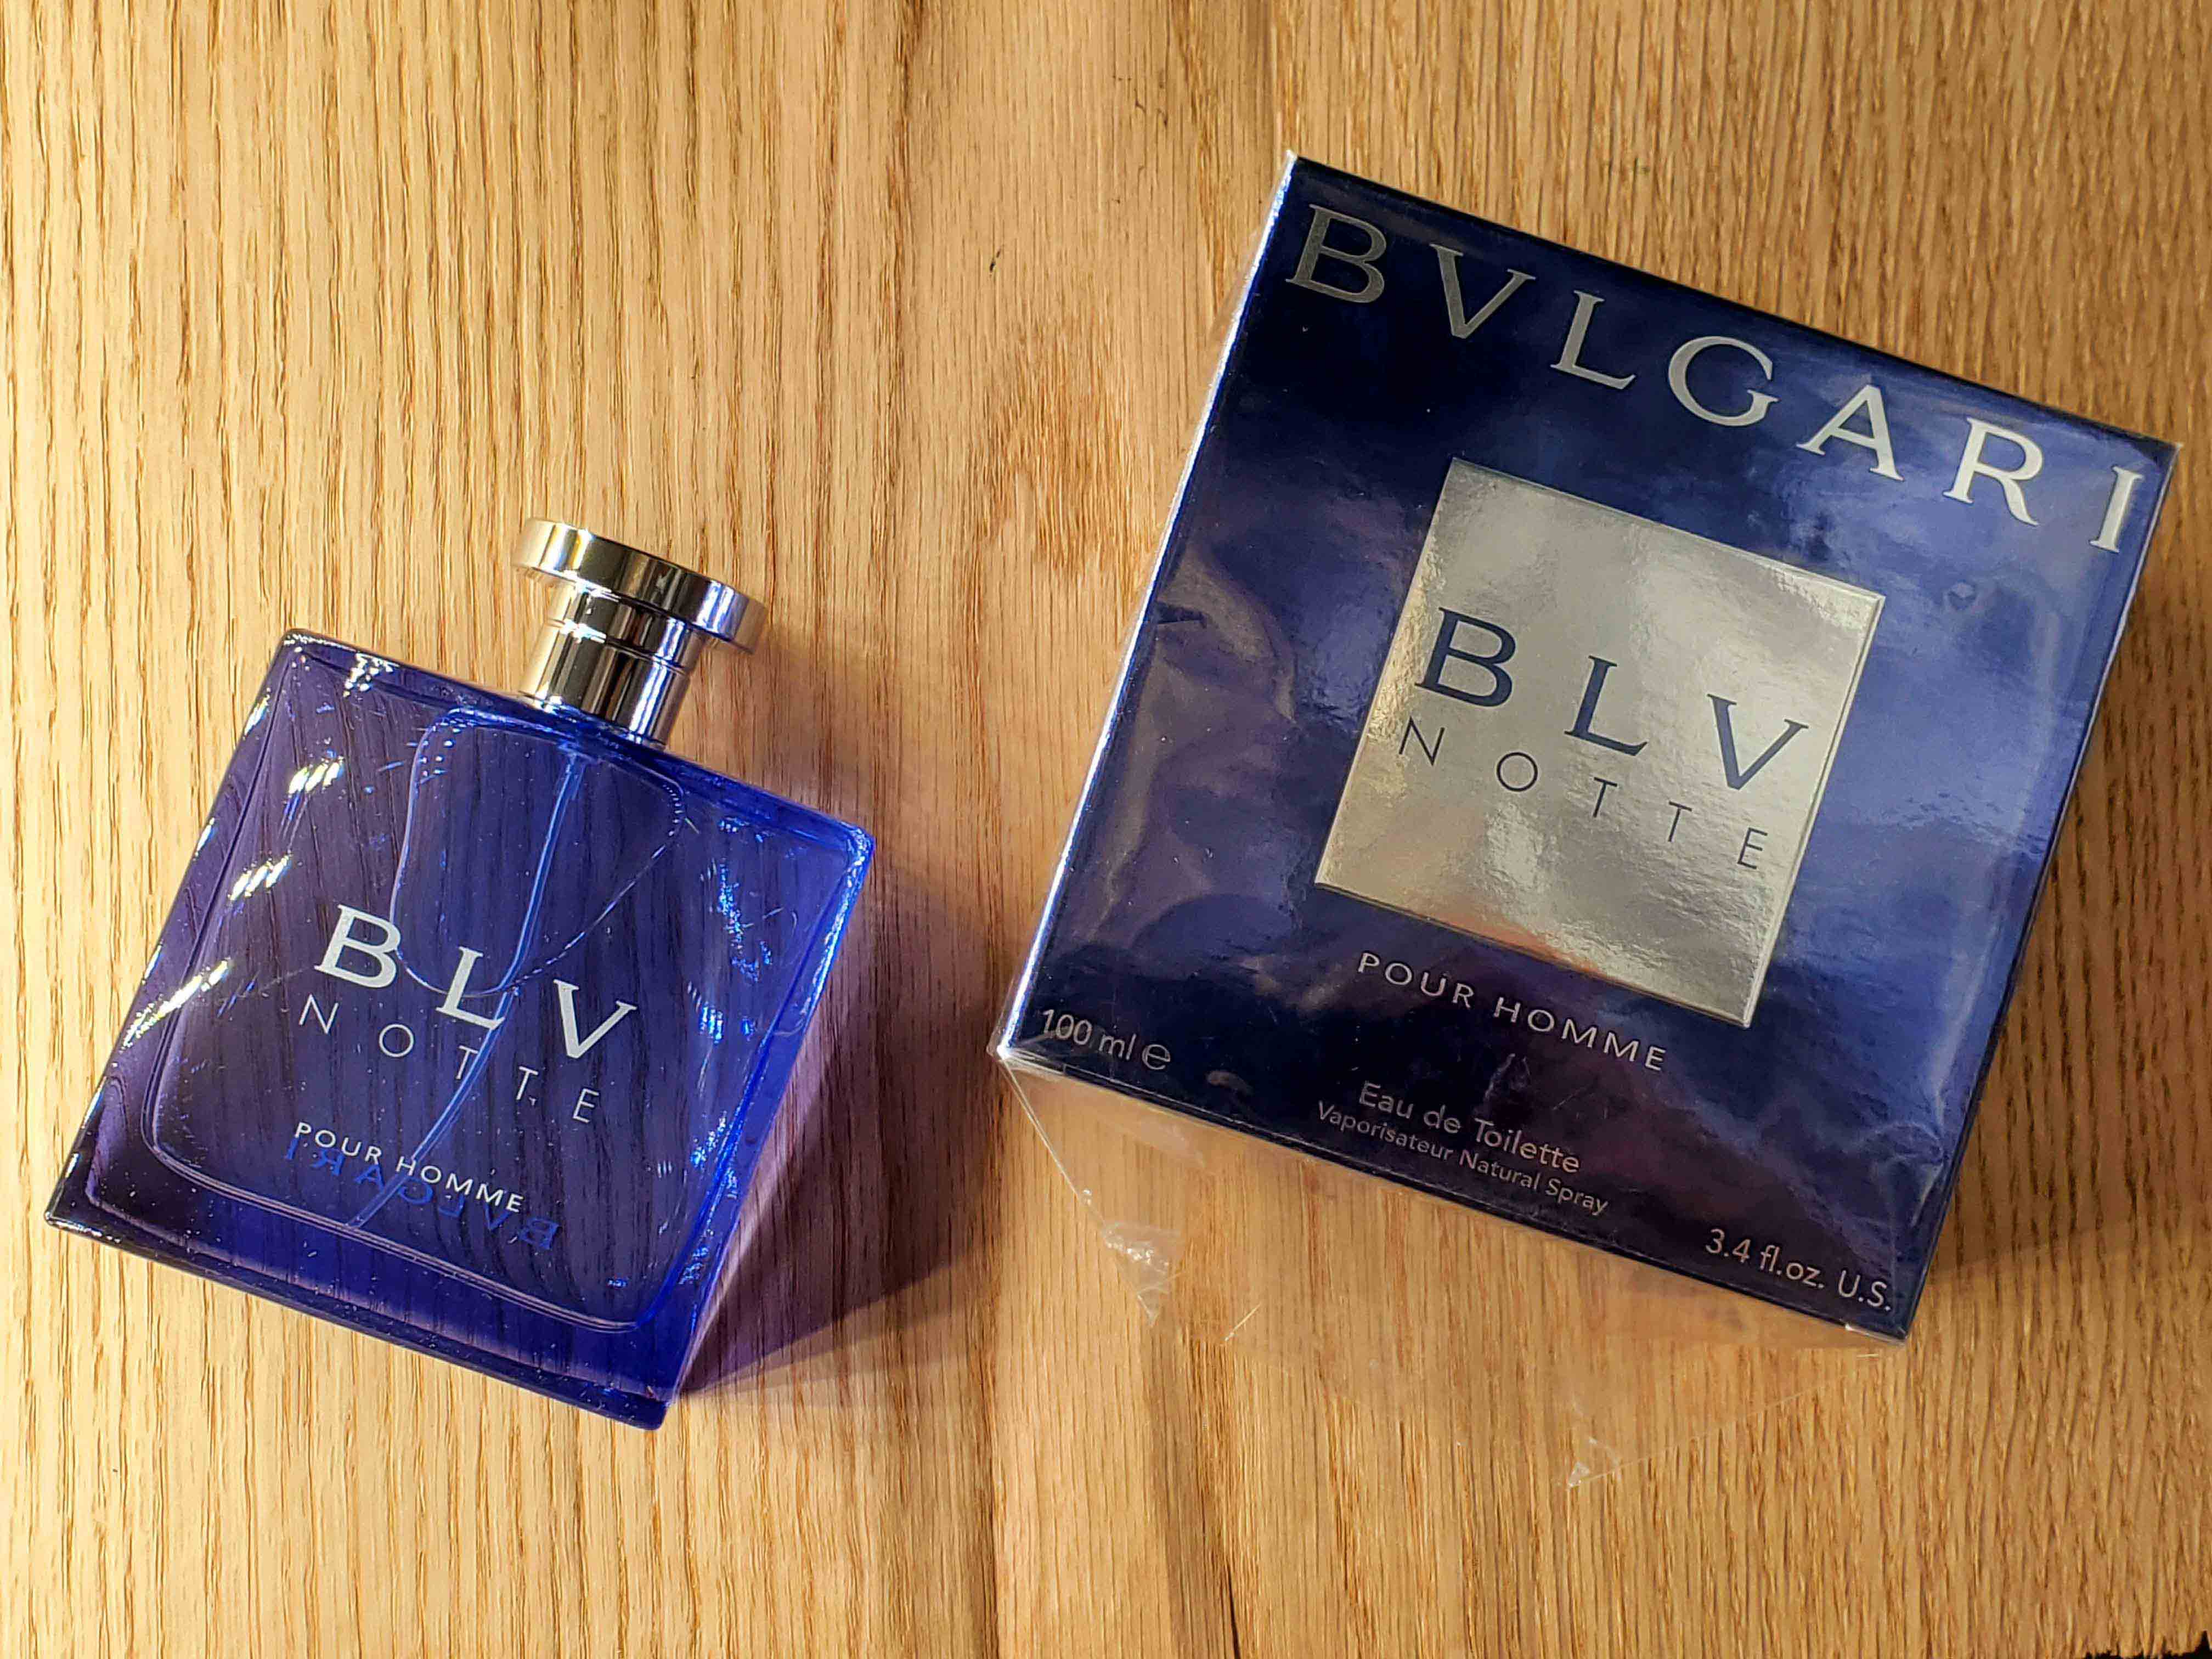 BLV Notte Pour Homme by Bvlgari for Men EDT Spray 3.4 Oz